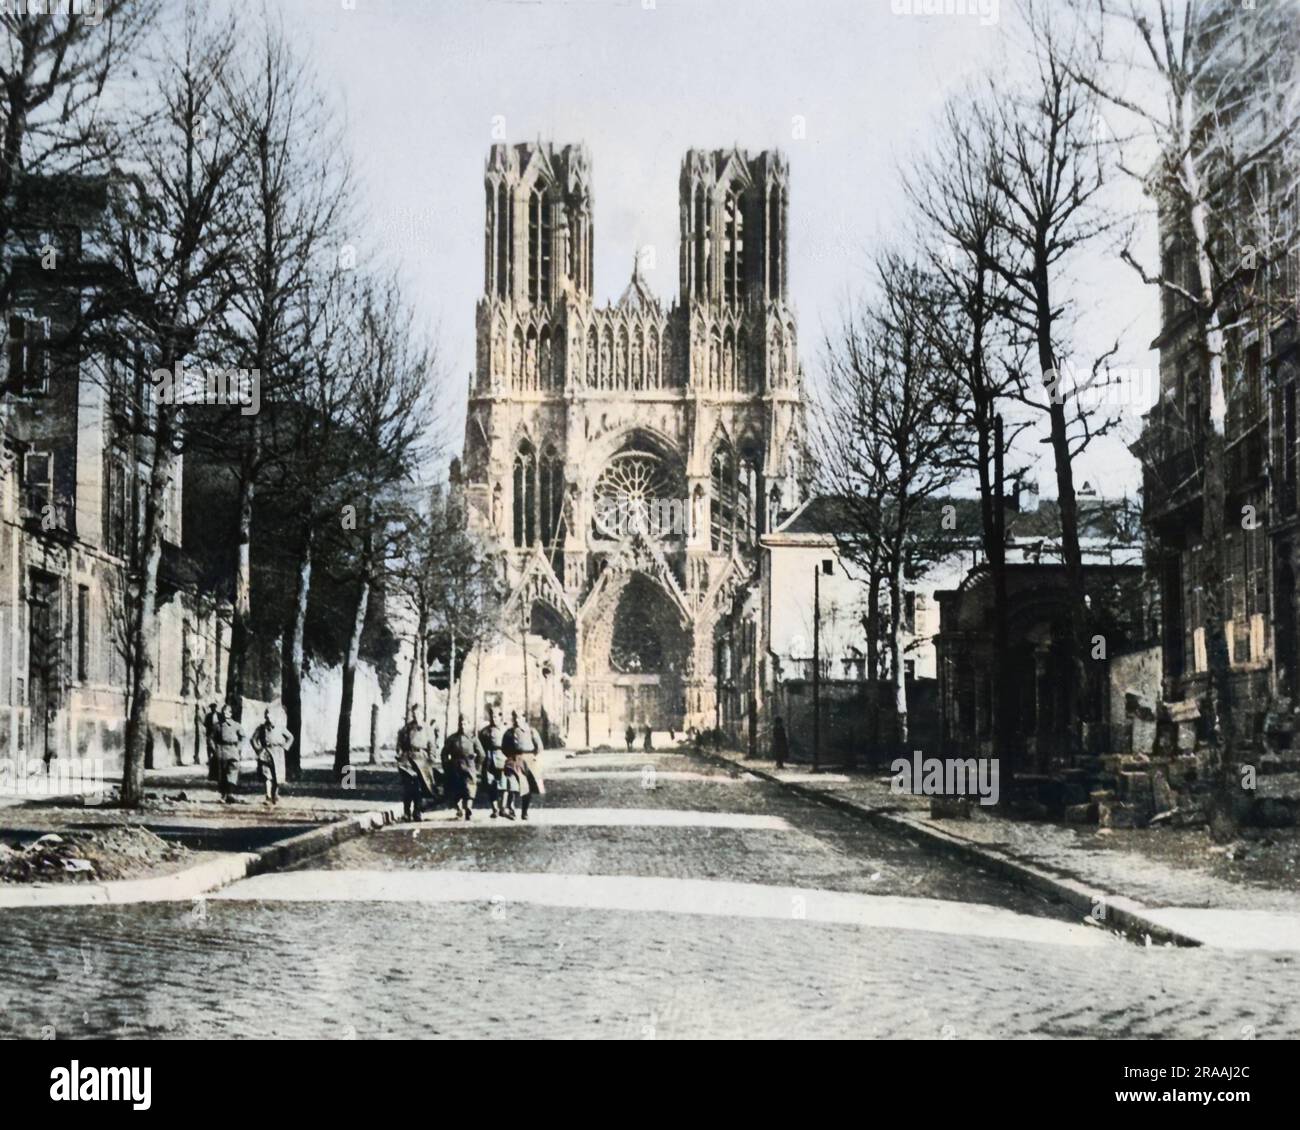 Reims Cathedral in France restored and back in use after damage sustained during World War One.     Date: Jun-20 Stock Photo